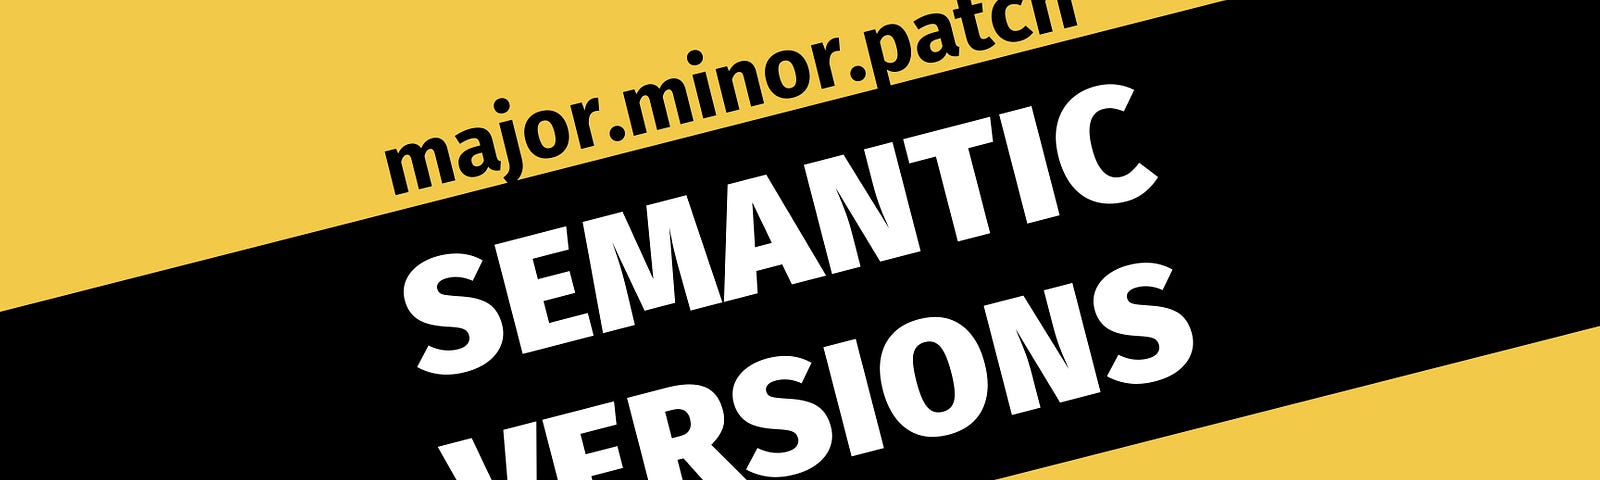 Yellow and black banner image with the text of “Semantic Versions”